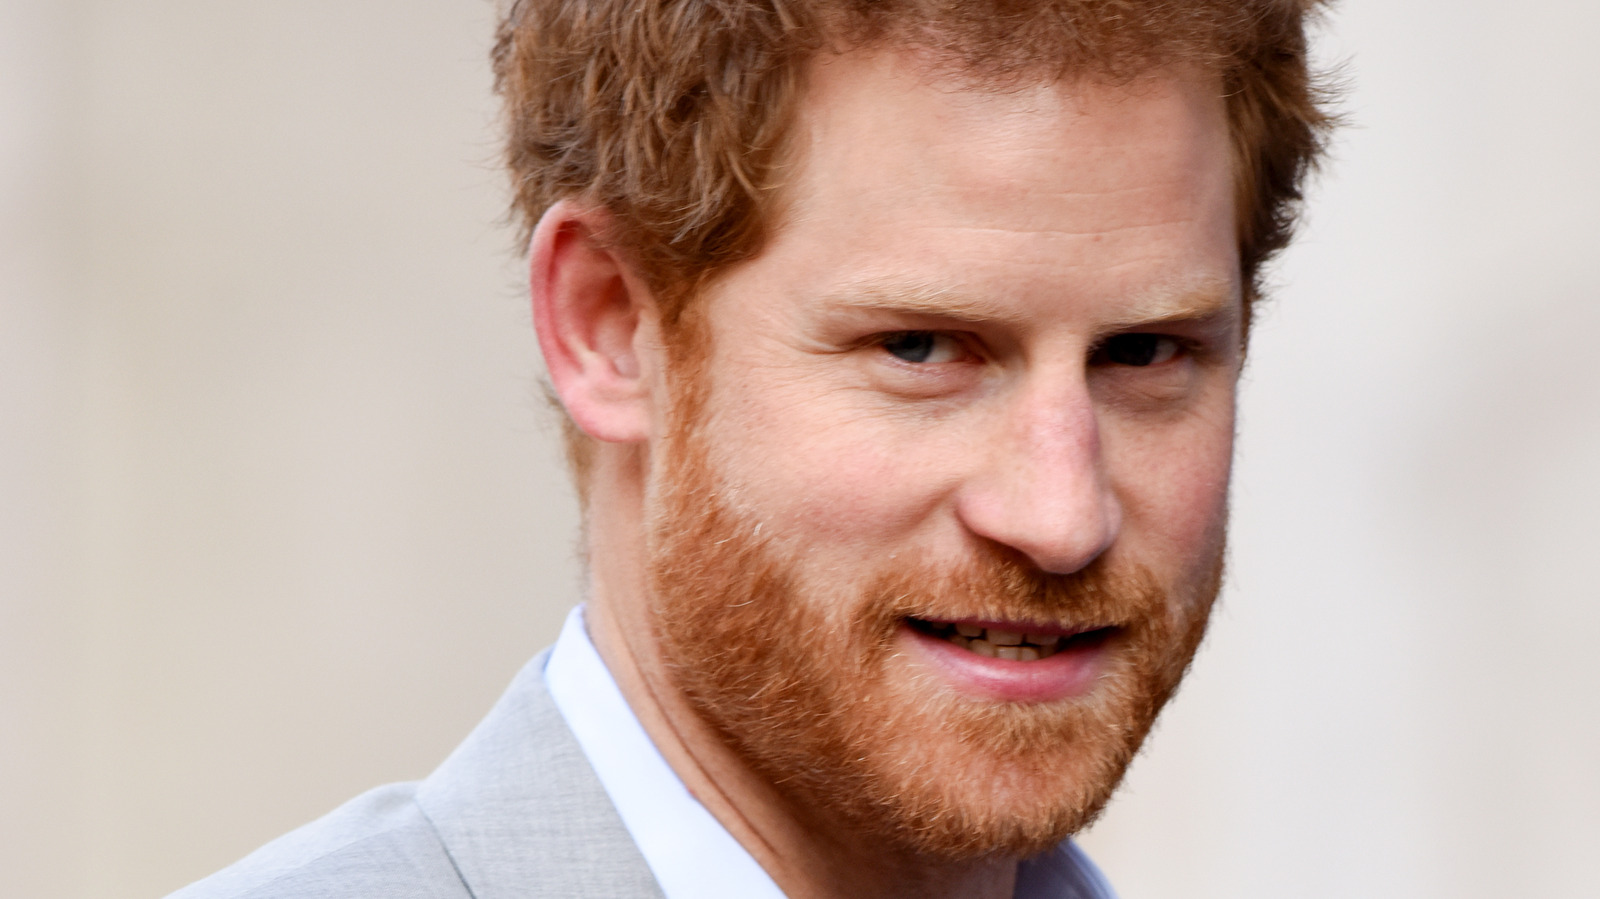 Royal Expert Reveals The Truth About Prince Harry’s Hair